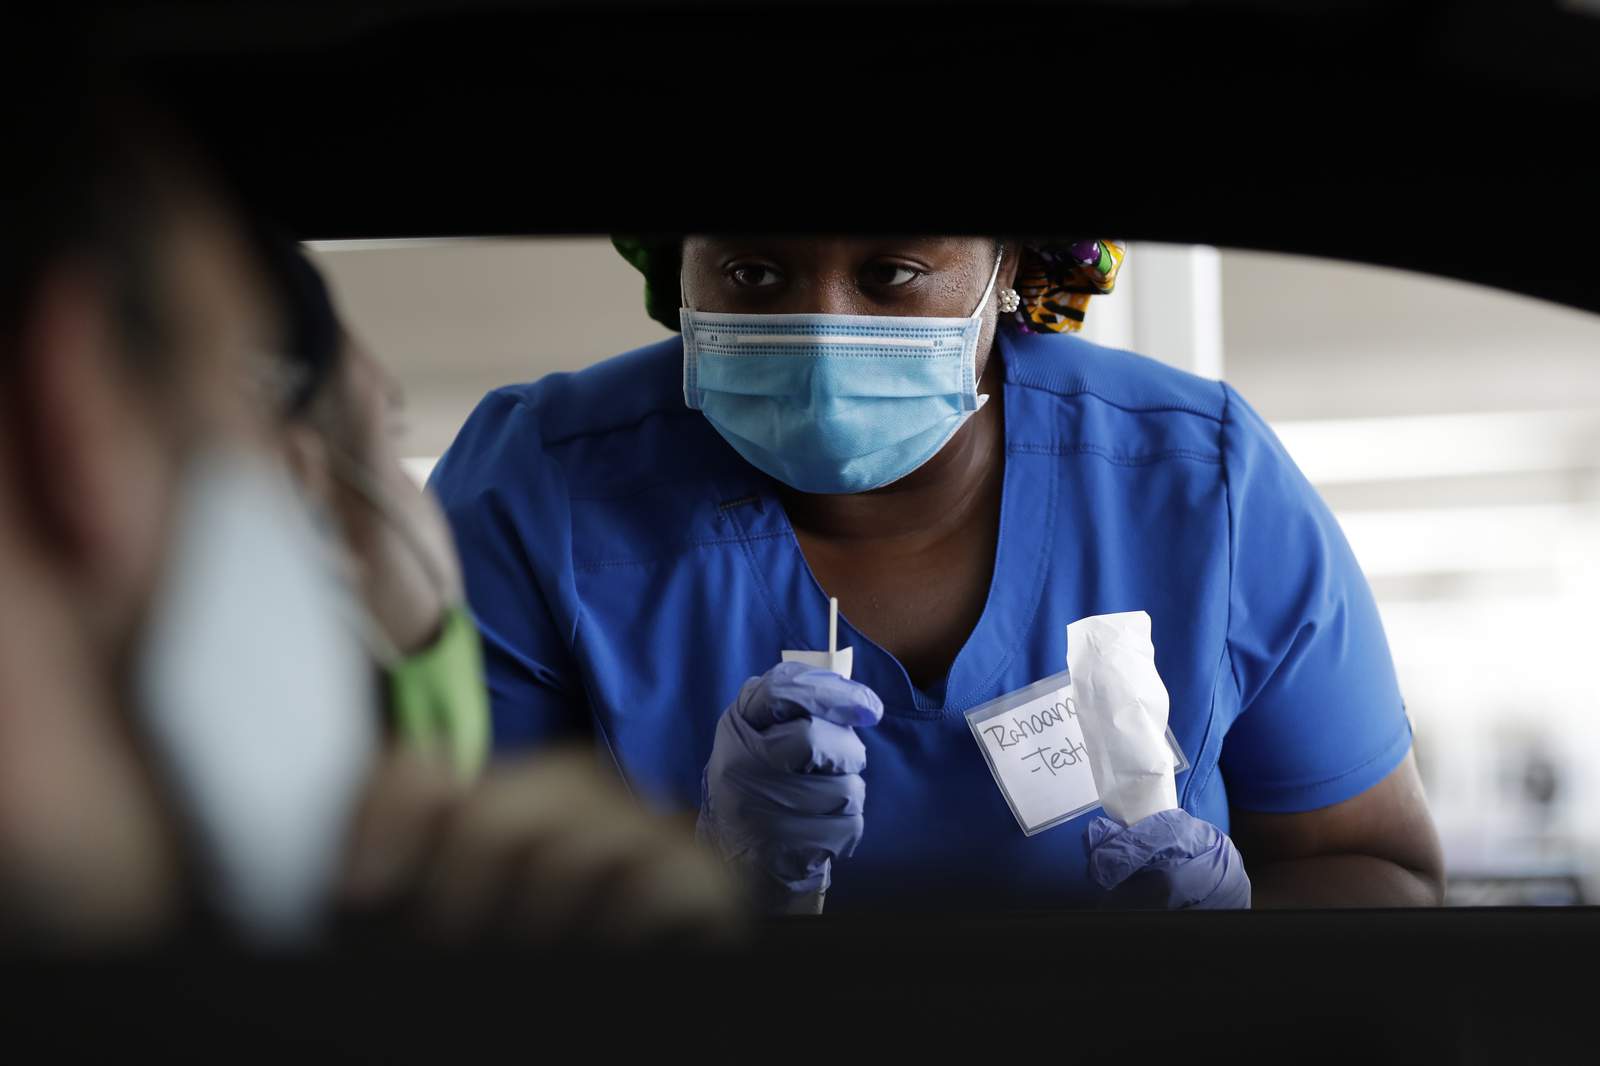 Healthcare worker Rahaana Smith instructs passengers how to use a nasal swab Friday at a drive-thru COVID-19 testing site at the Miami-Dade County Auditorium.